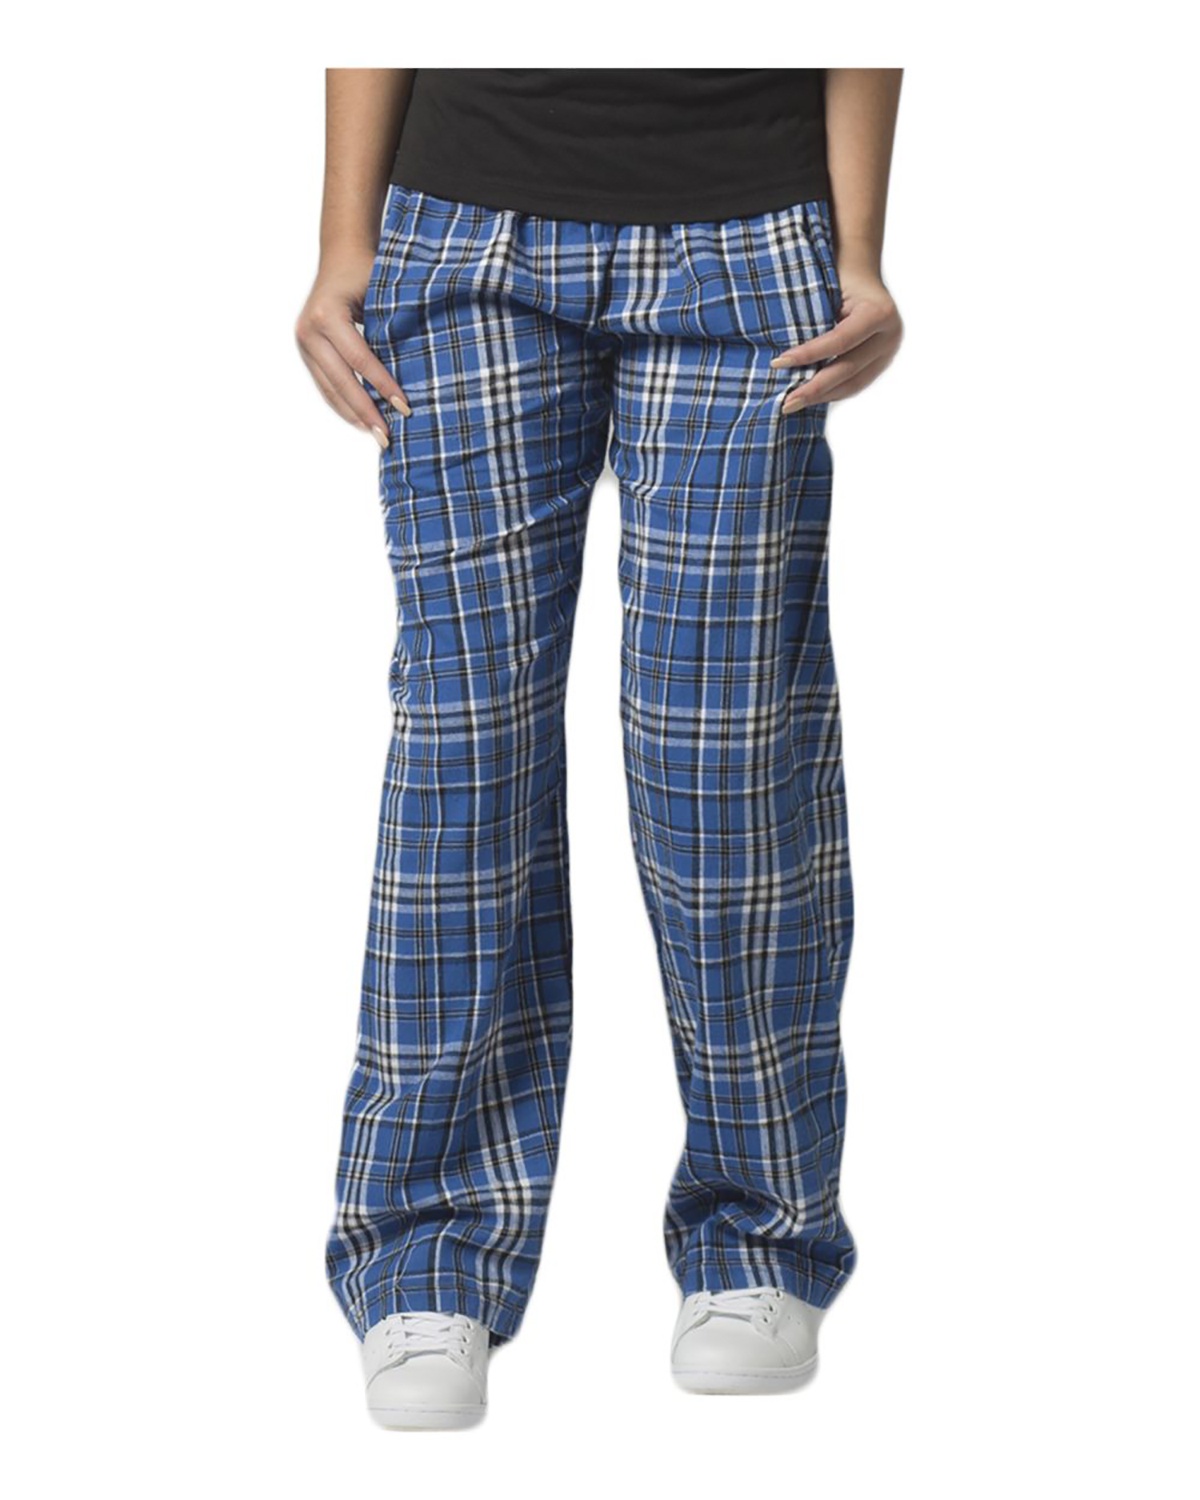 Wholesale Boxercraft Y20 | Buy Youth Flannel Pants with Pockets - VeeTrends.com